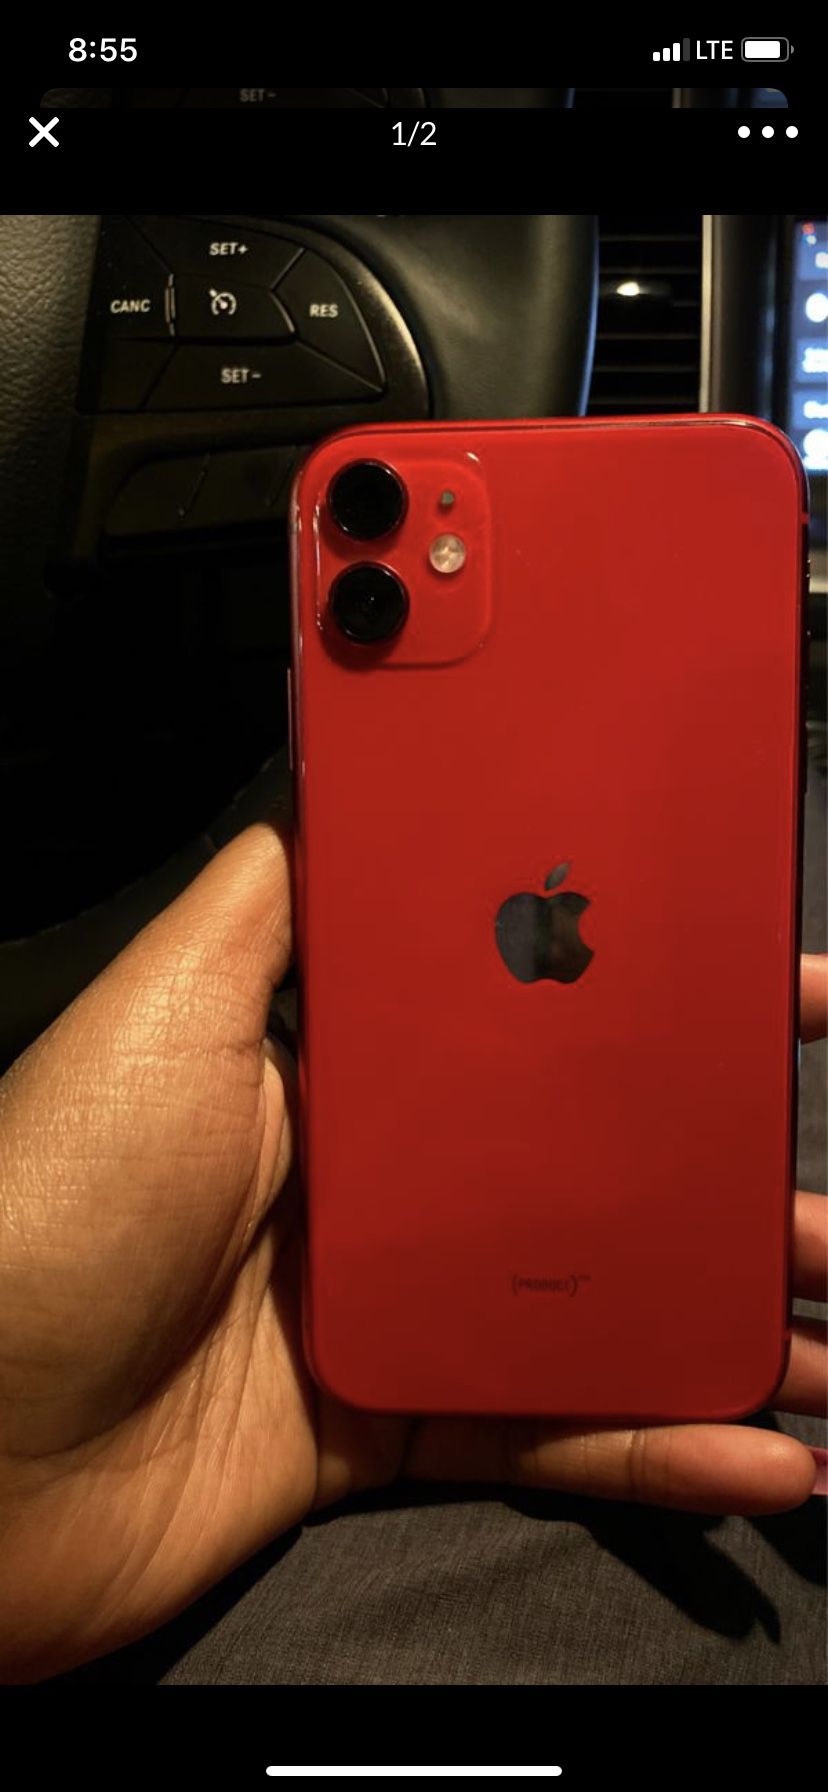 iPhone 11 64GB for sale comes with a charger cord and headphones must come to meet but meet at nearest public store NO I DONT DO SHIPPING OR PAYPAL D